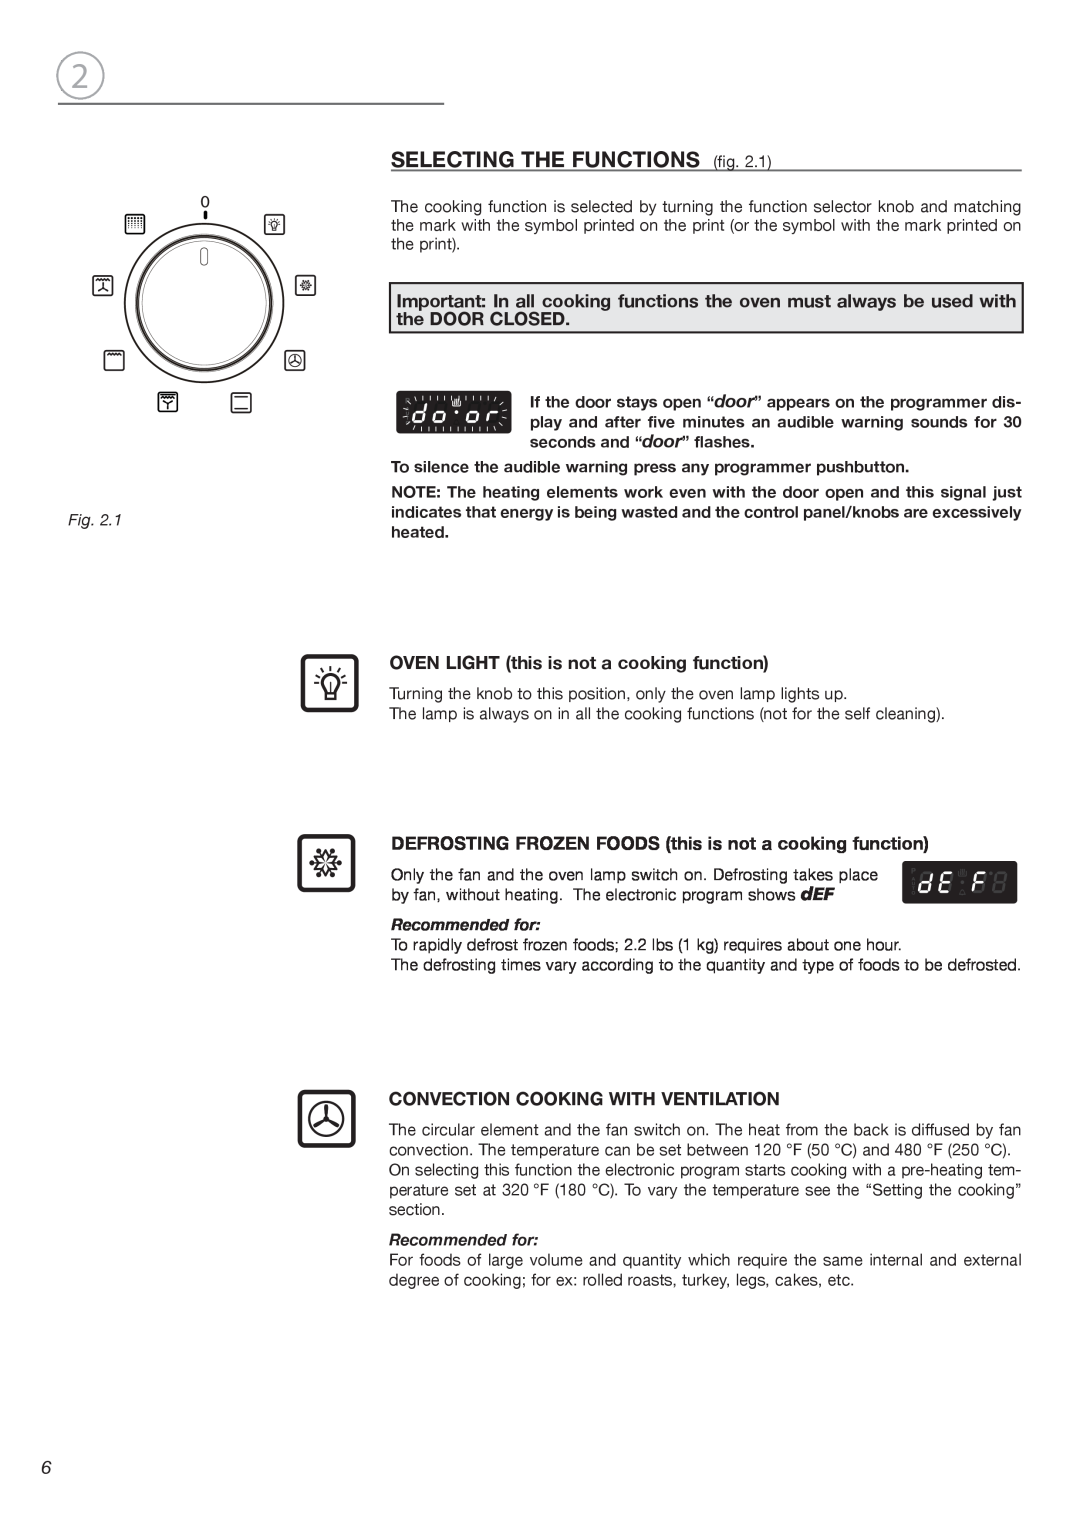 Fisher & Paykel OB24SDPX SELECTING THE FUNCTIONS fig, OVEN LIGHT this is not a cooking function, Recommended for 